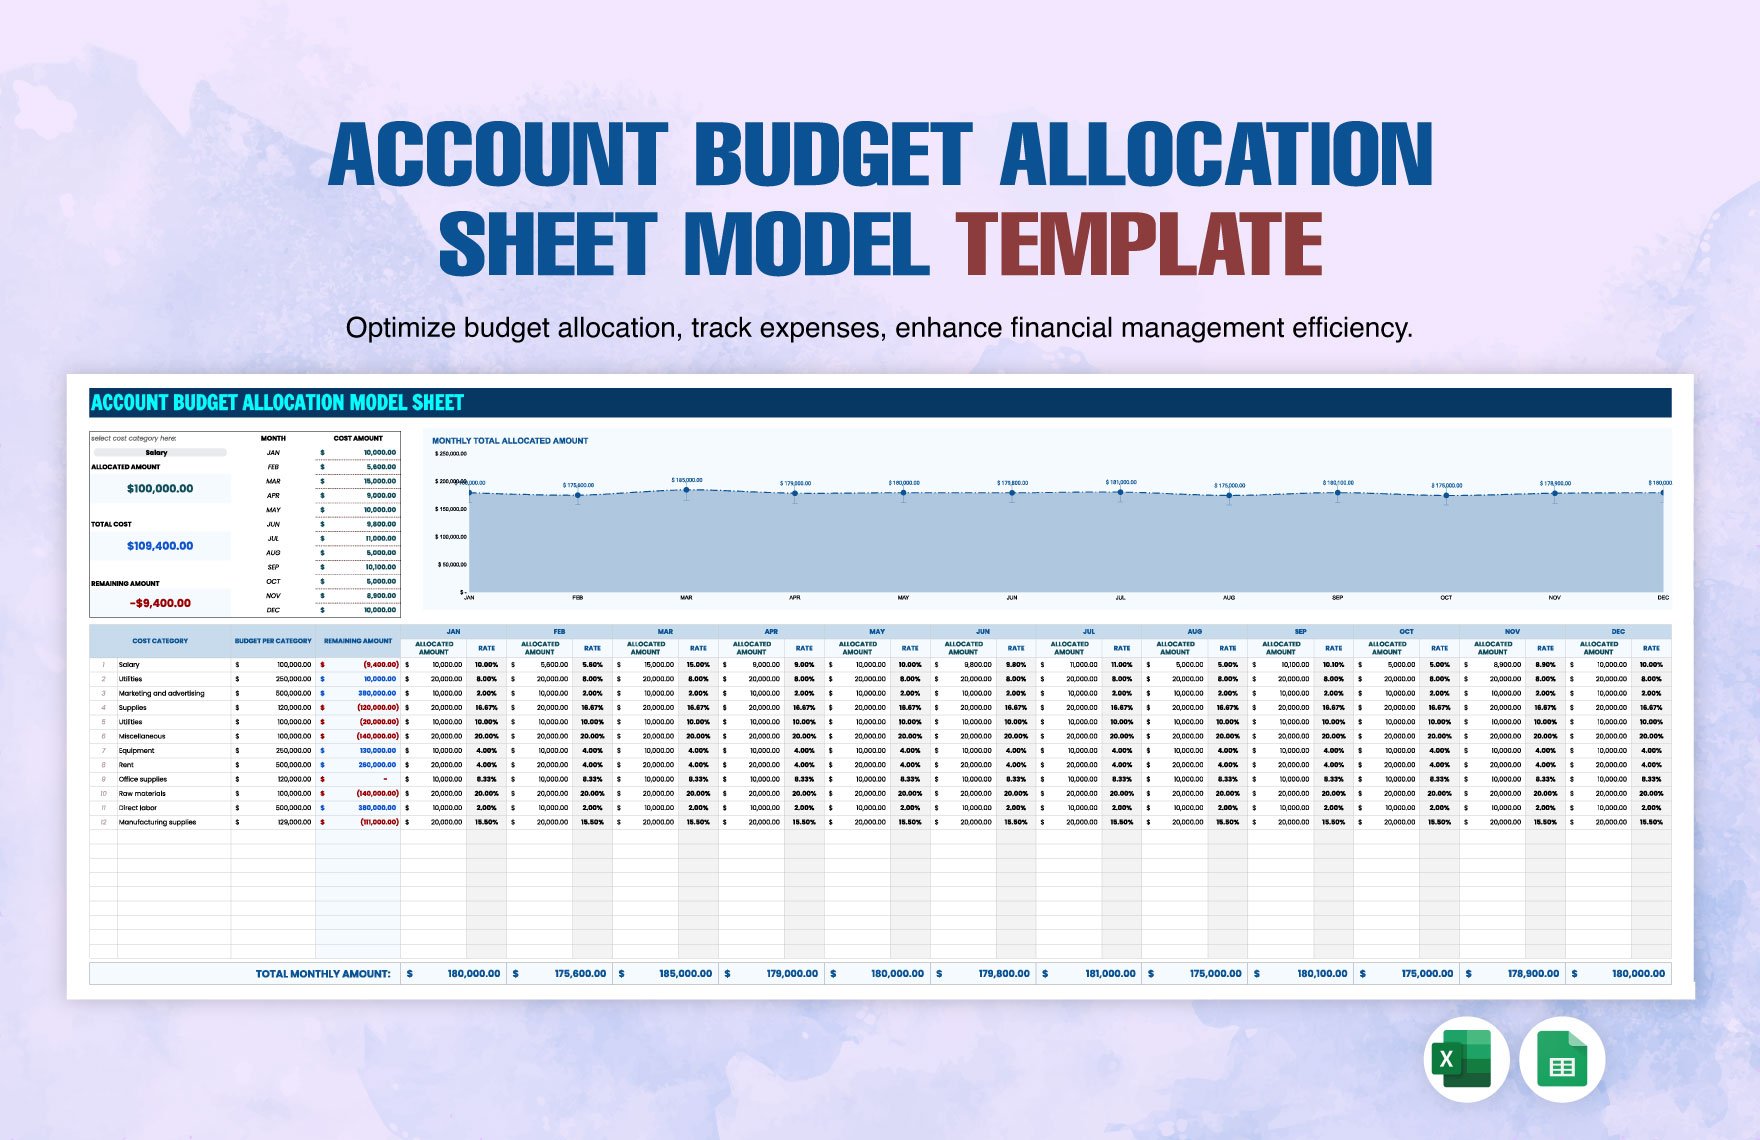 Account Budget Allocation Model Sheet Template in Excel, Google Sheets